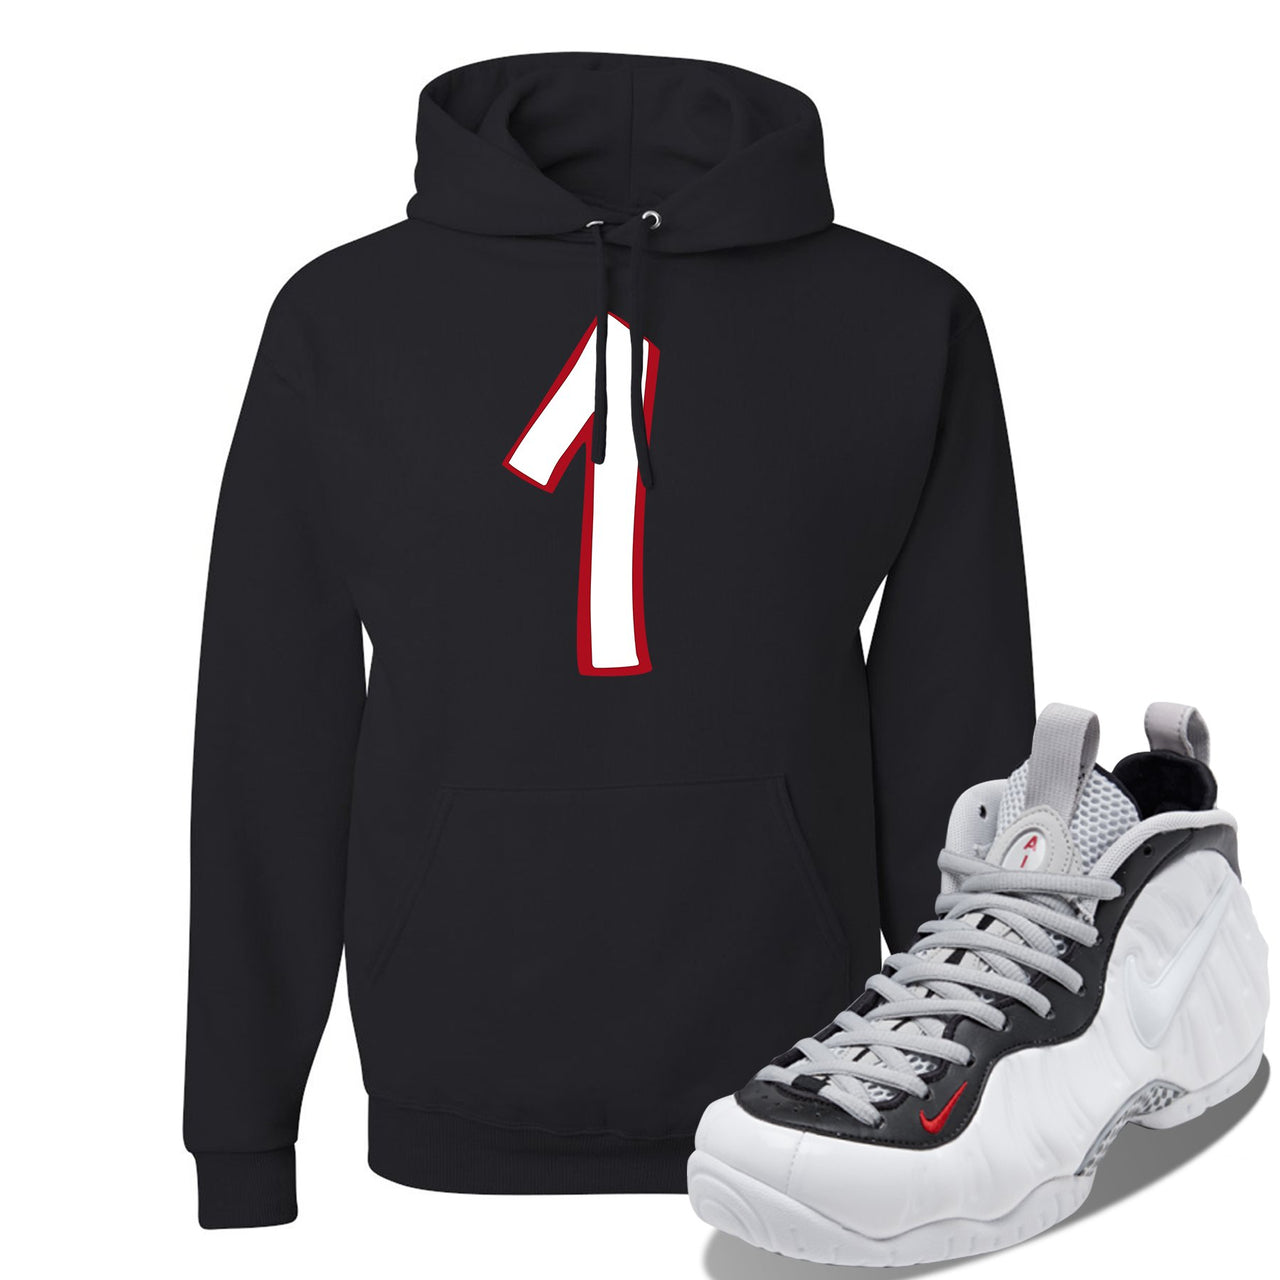 Foamposite Pro White Black University Red Sneaker Black Pullover Hoodie | Hoodie to match Nike Air Foamposite Pro White Black University Red Shoes | Penny One